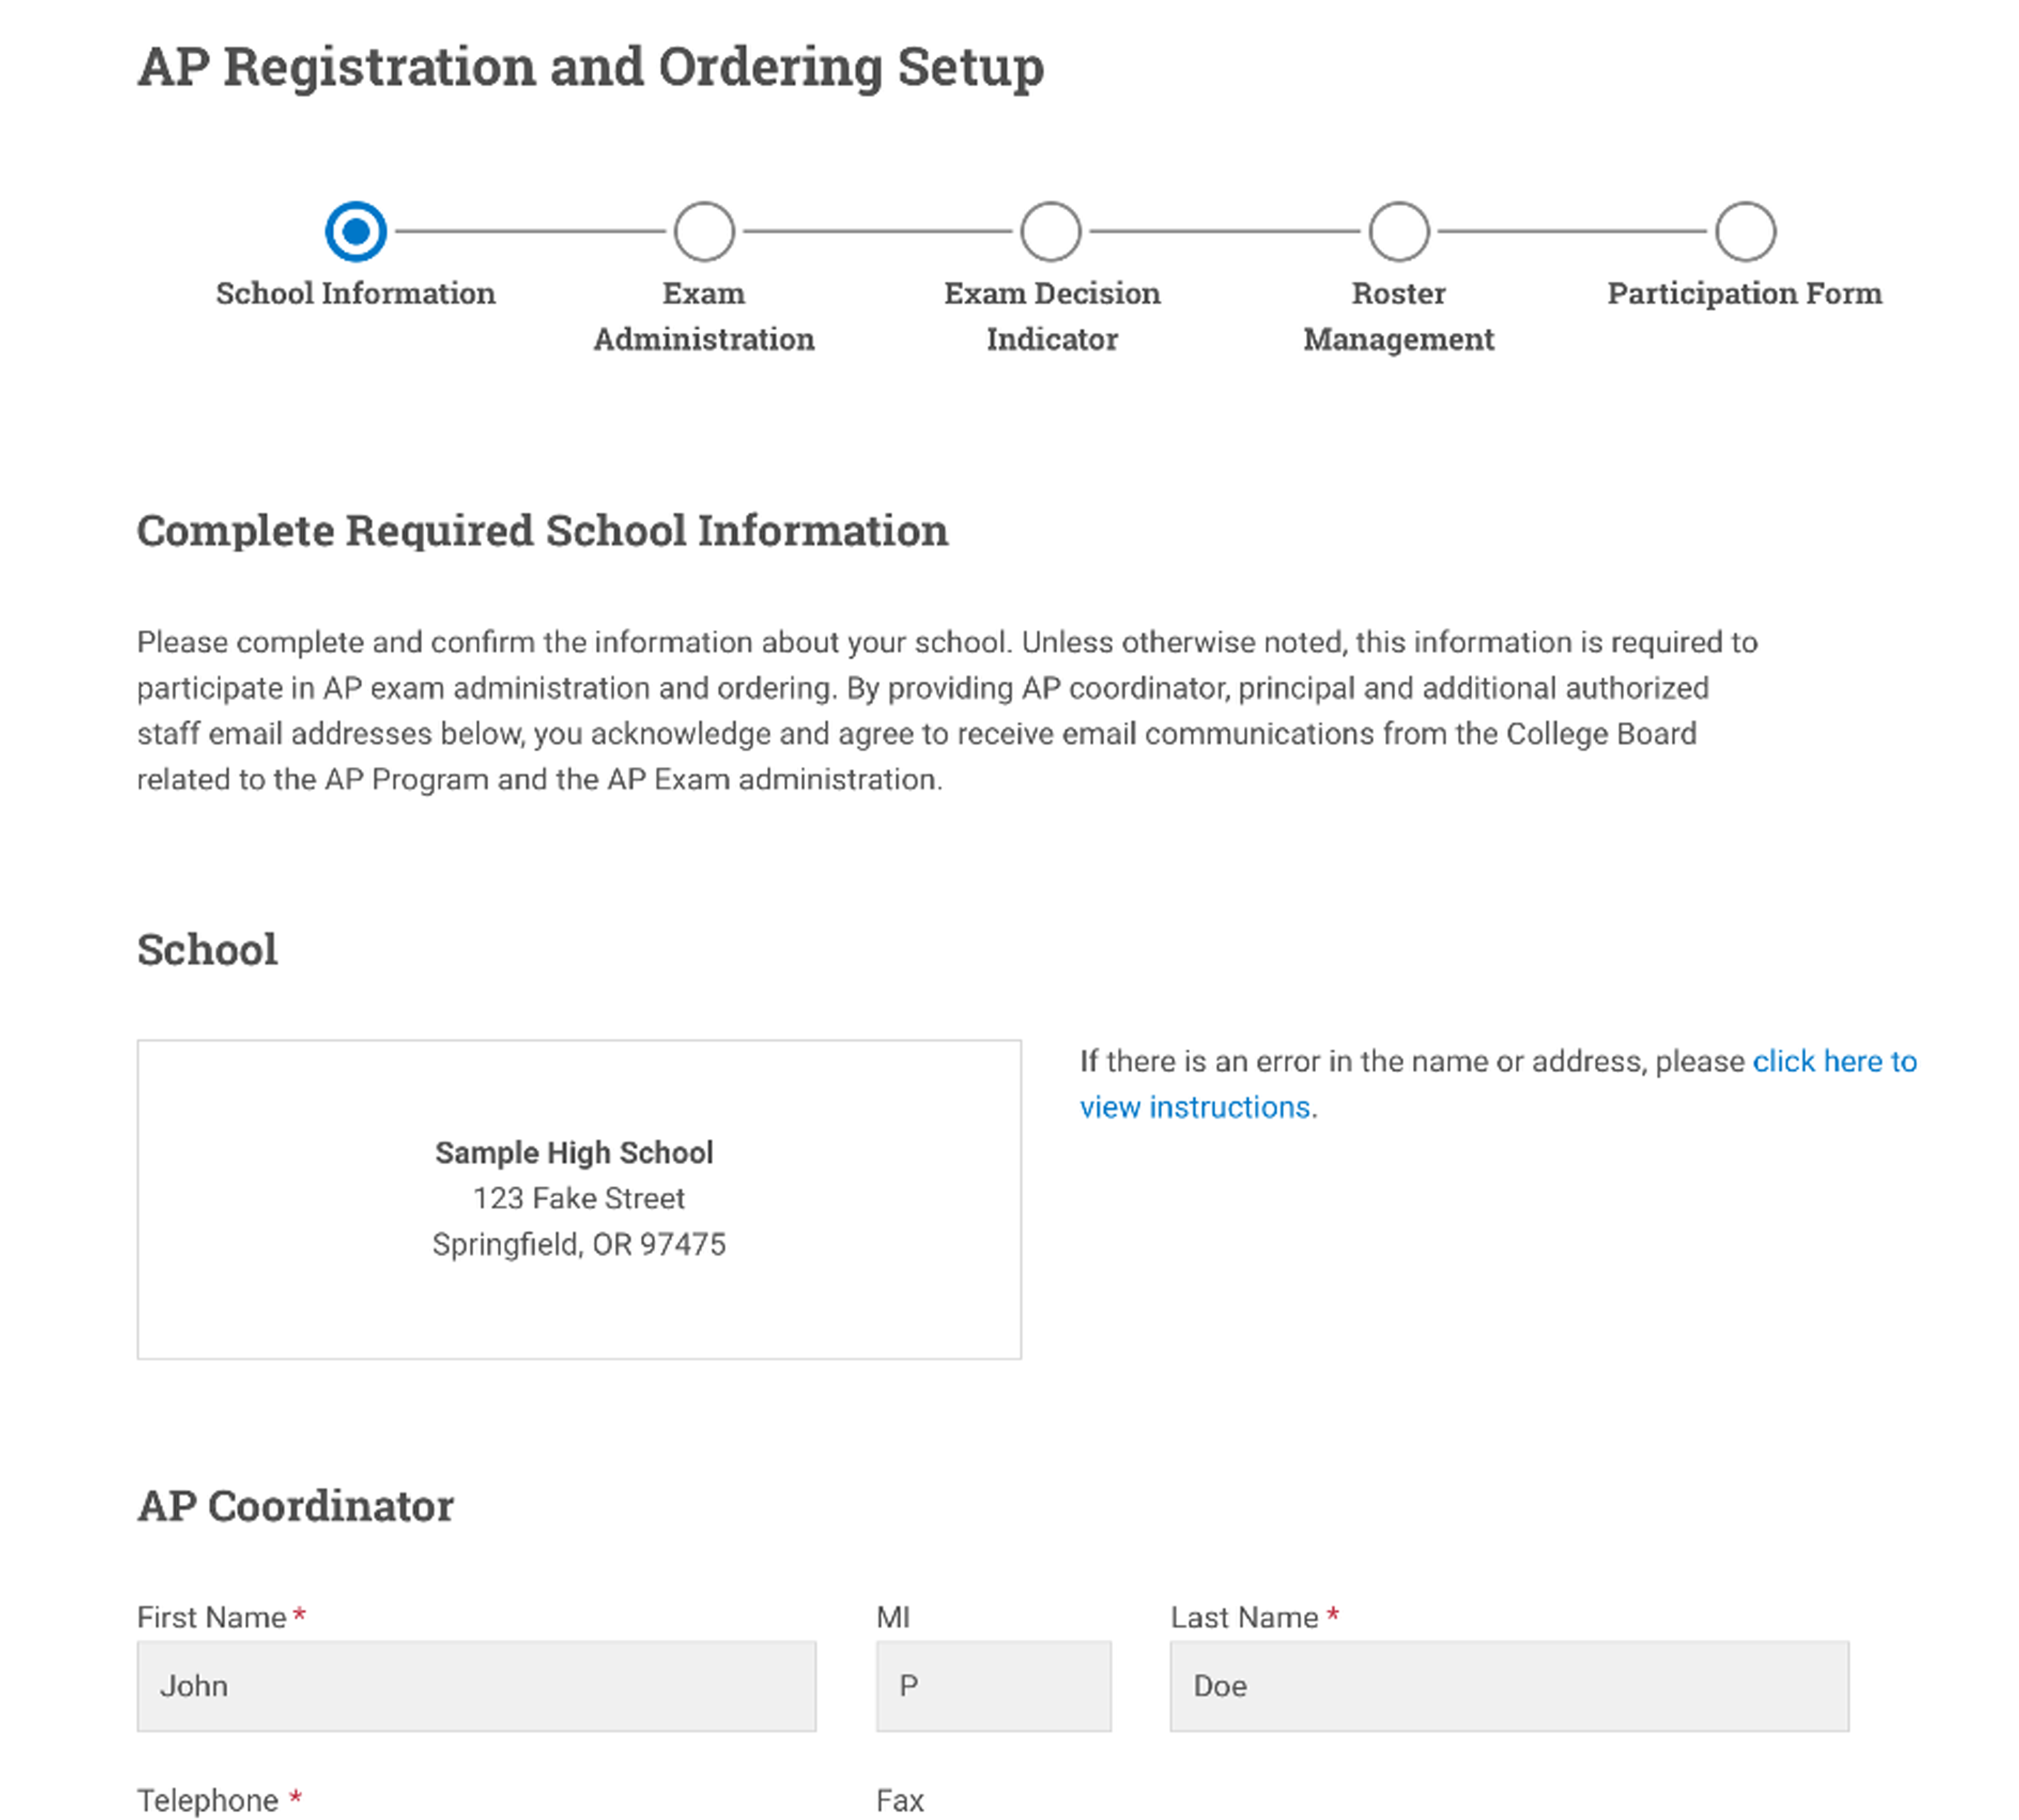 How do I complete initial setup in AP Registration and Ordering? AP